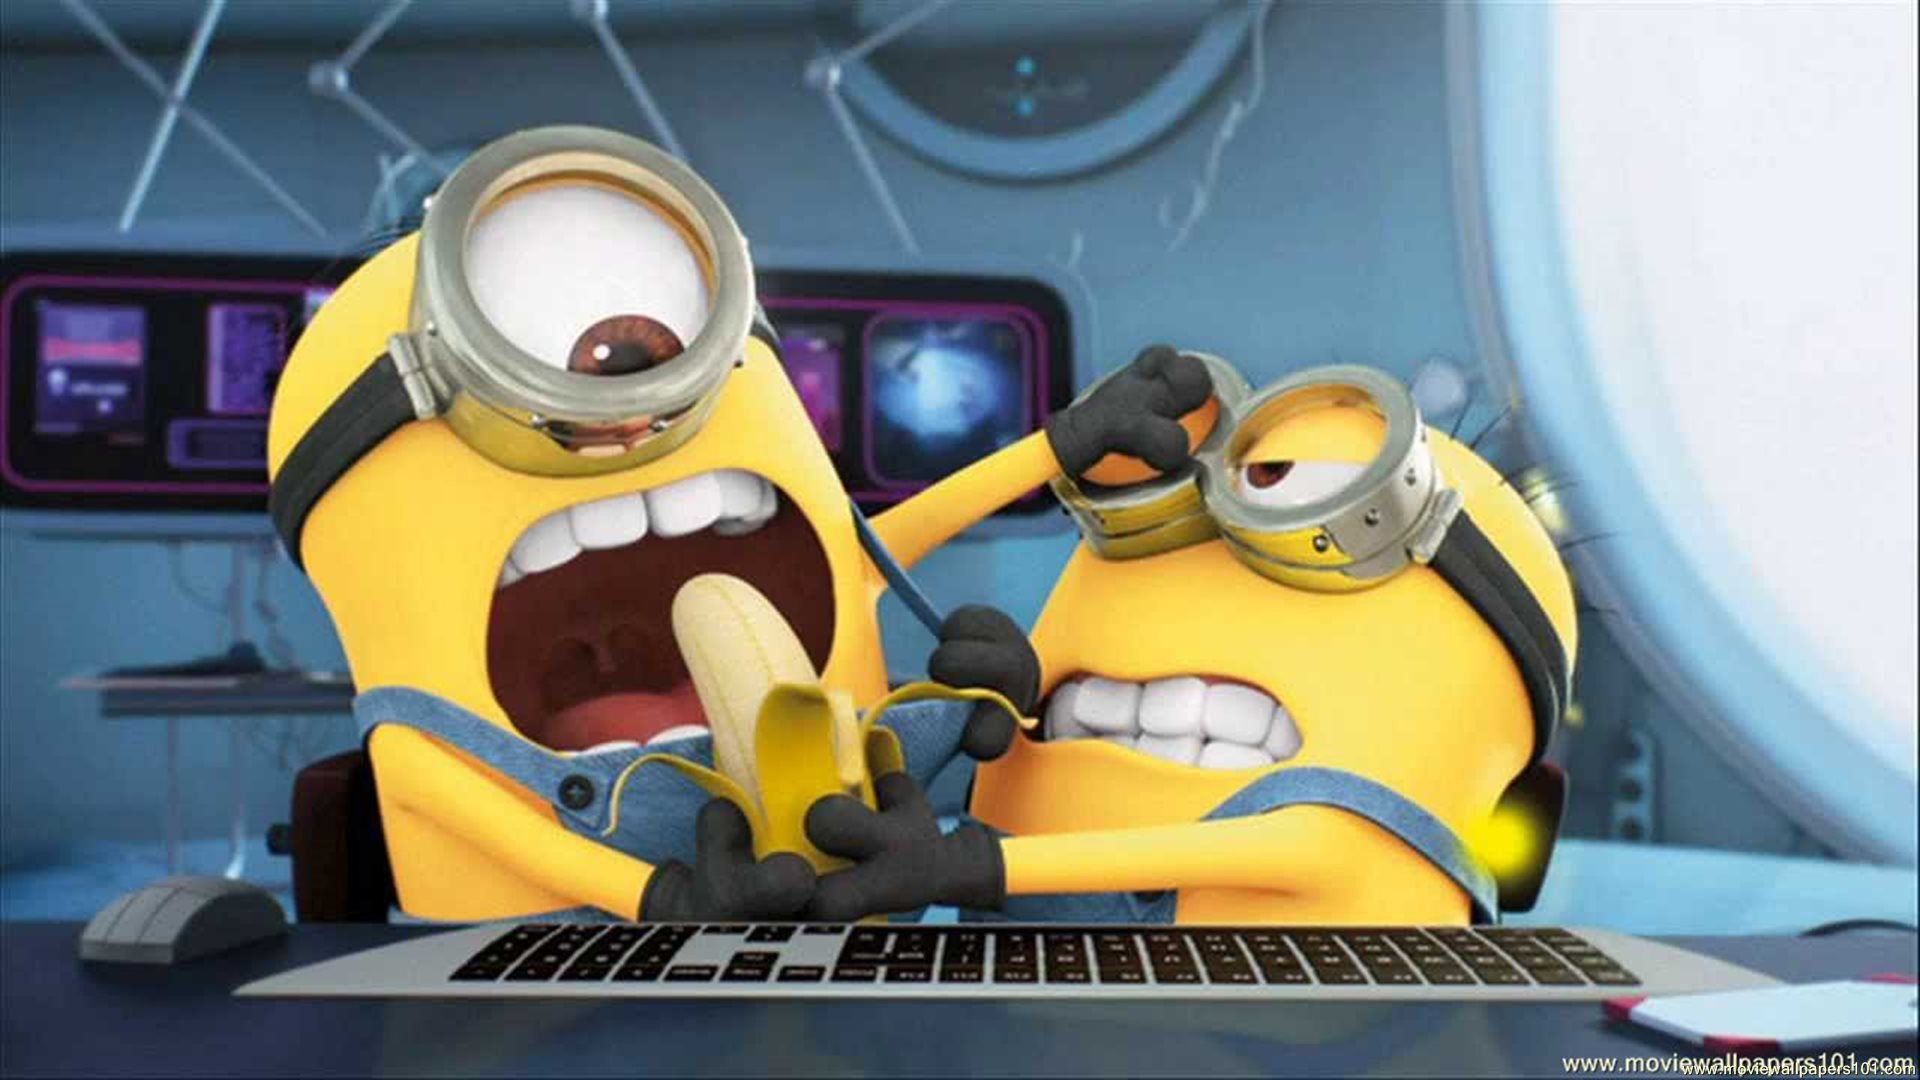 Minions 2015 Comedy Movie Wallpaper - DreamLoveWallpapers